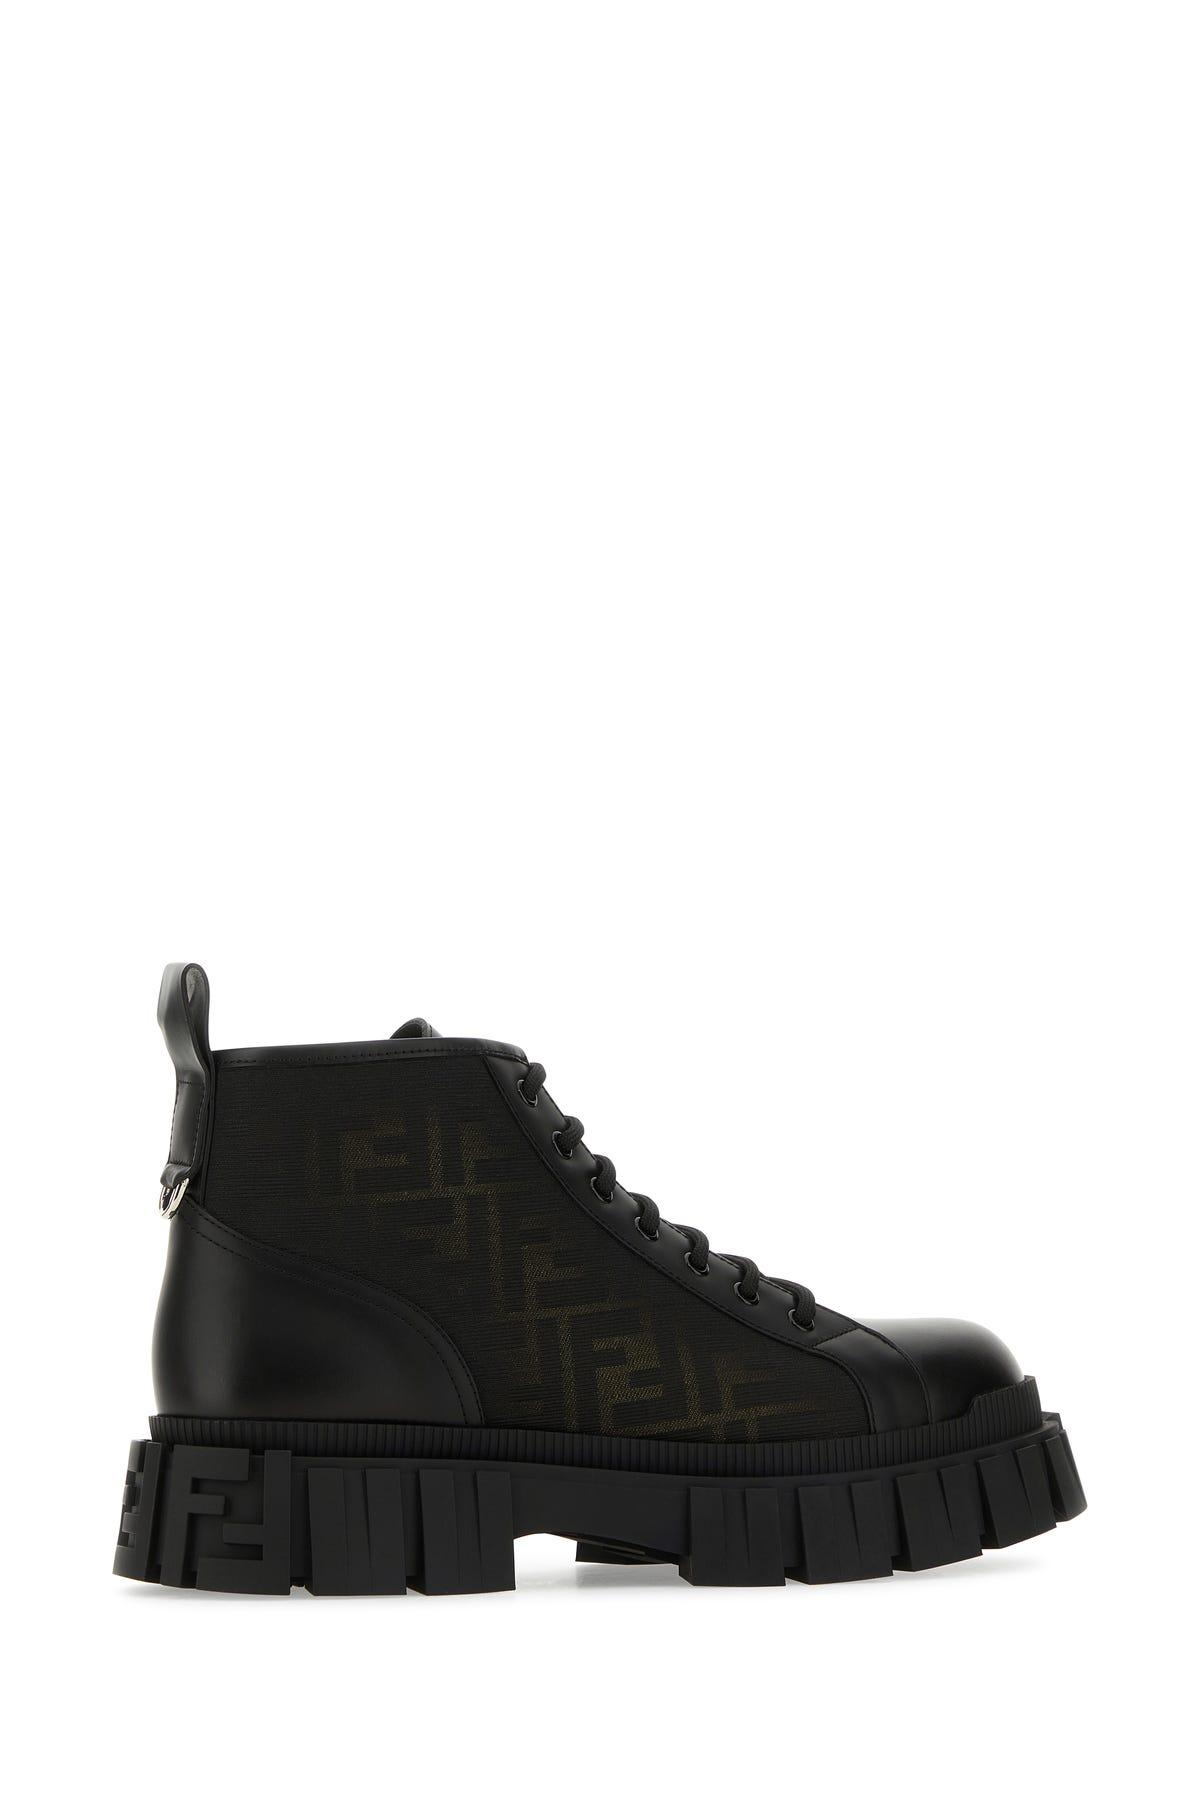 FENDI Outlet: Shoes men - Tobacco | FENDI sneakers 7E1258A7MY online at  GIGLIO.COM